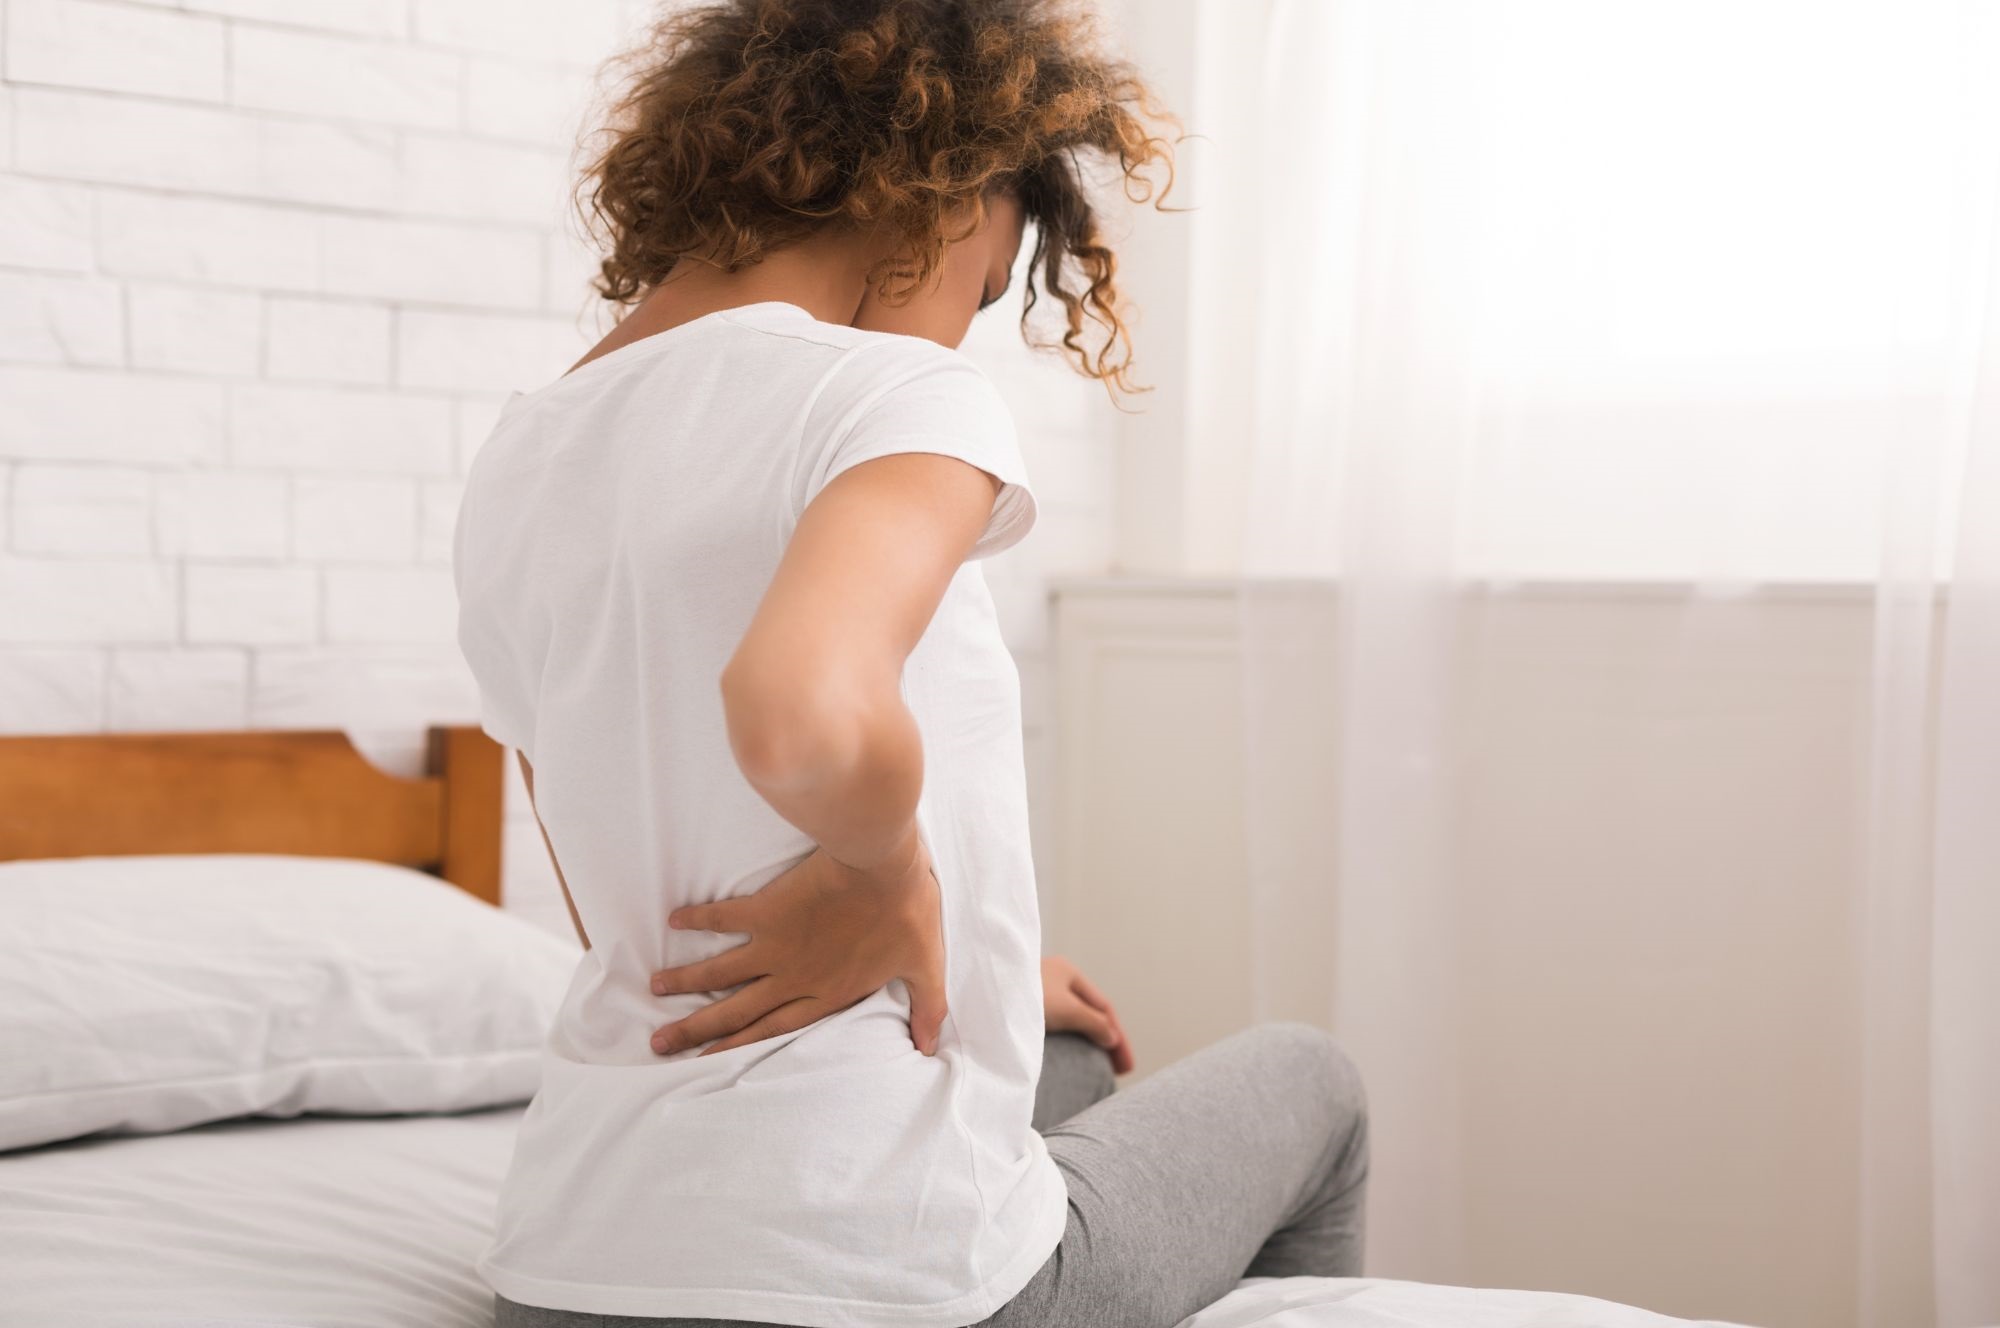 A Woman With A Lower Back Pain After Sleeping